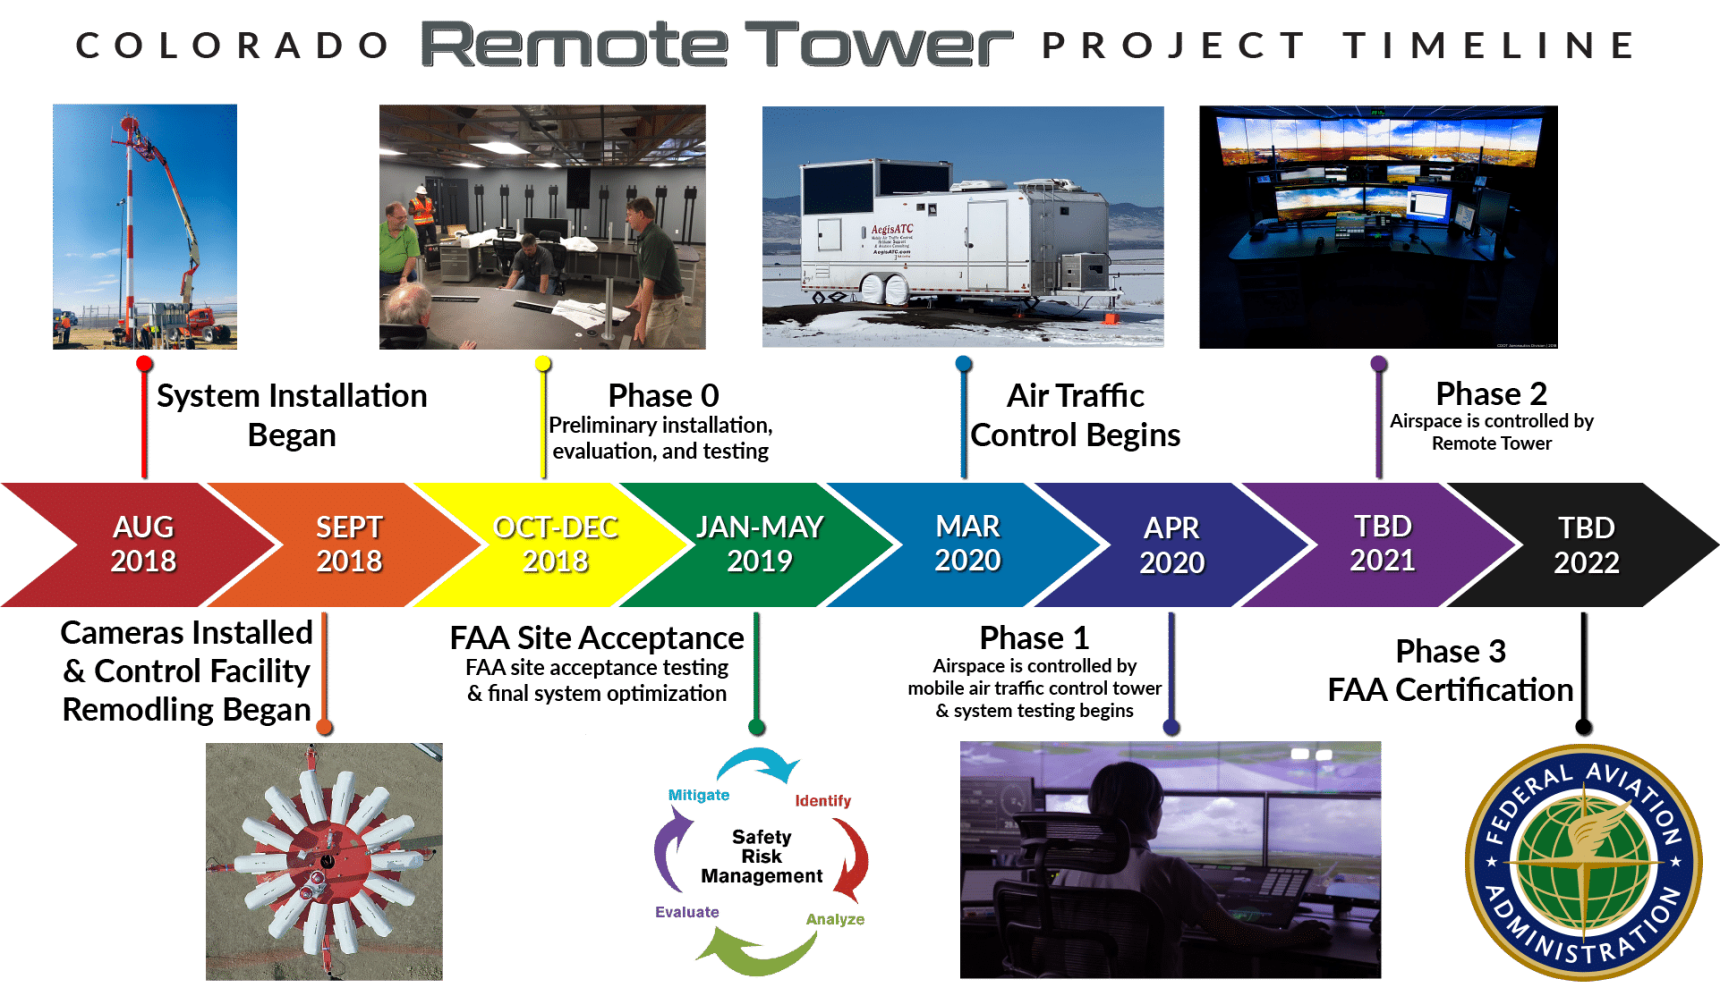 Remote Tower Project Timeline - February 2020 detail image